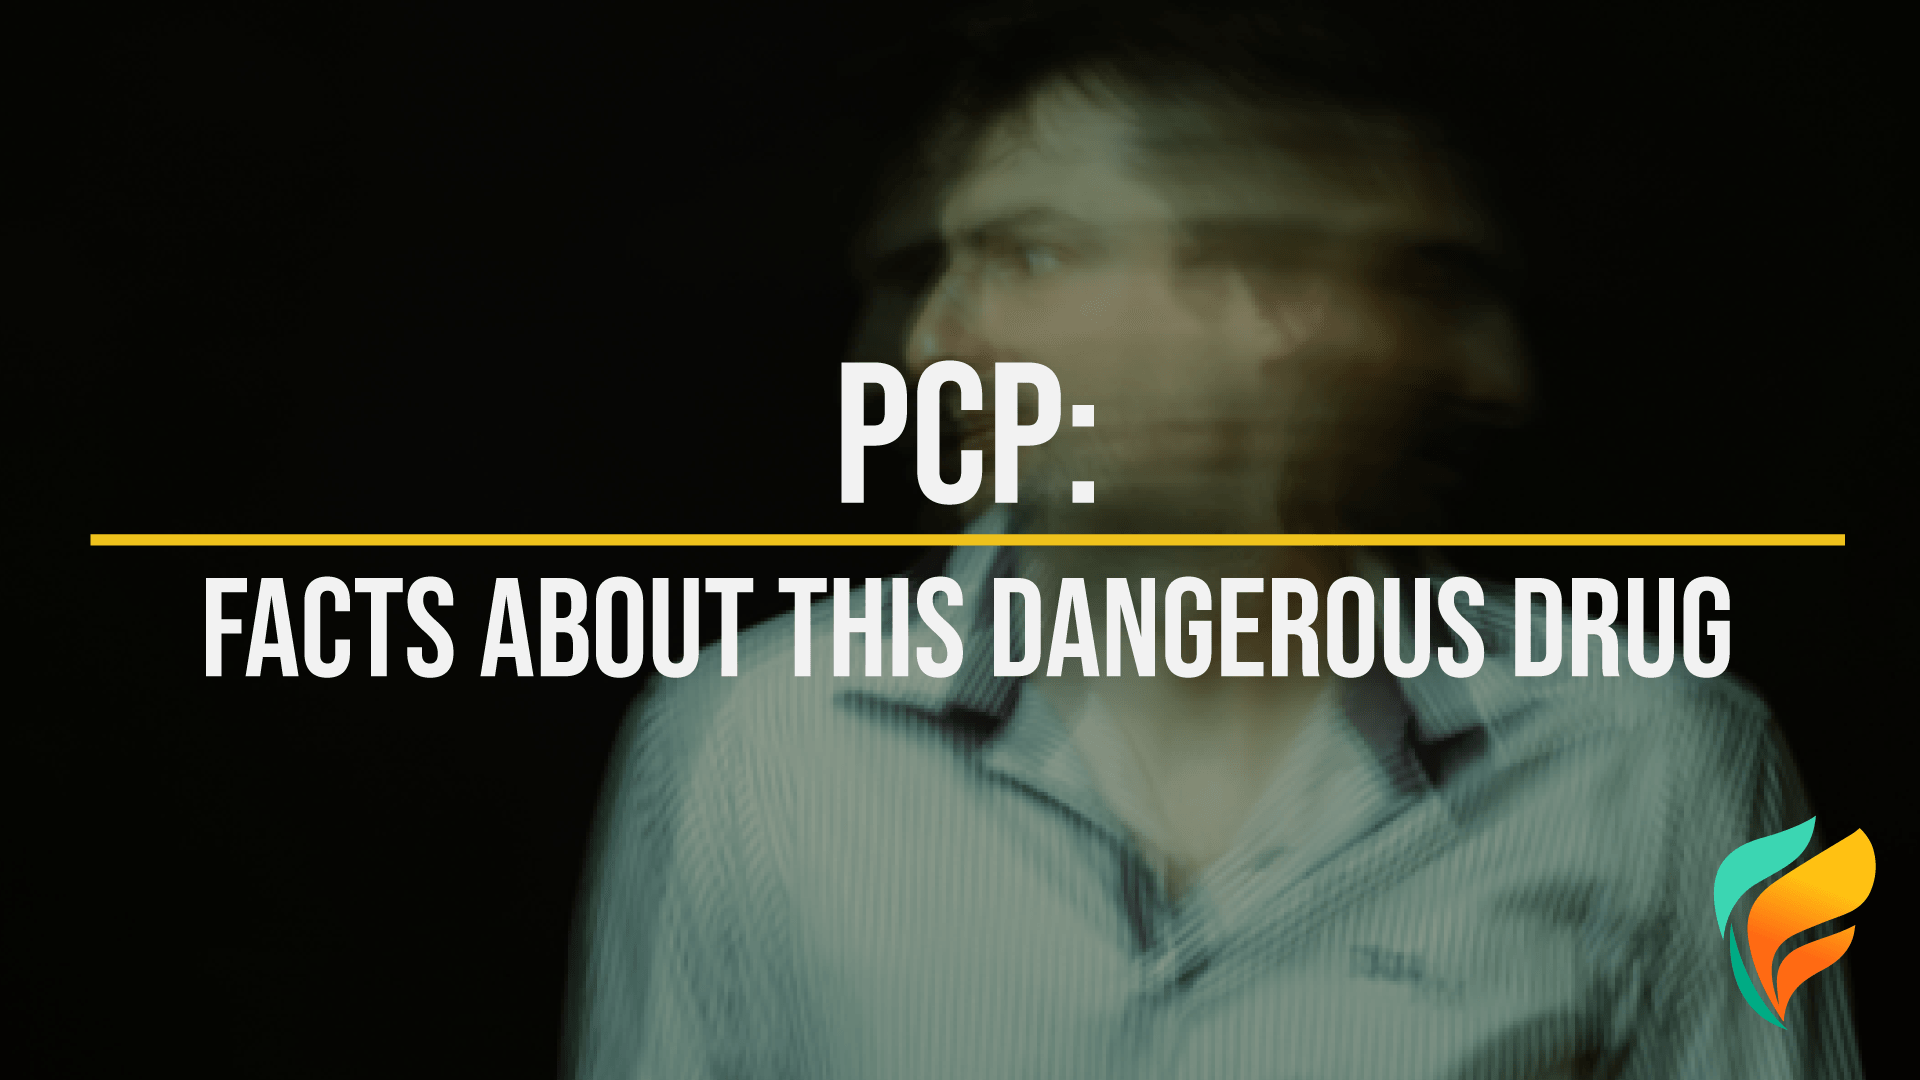 PCP: What is PCP, the Effects, Risks, & More of this Dangerous Anesthetic